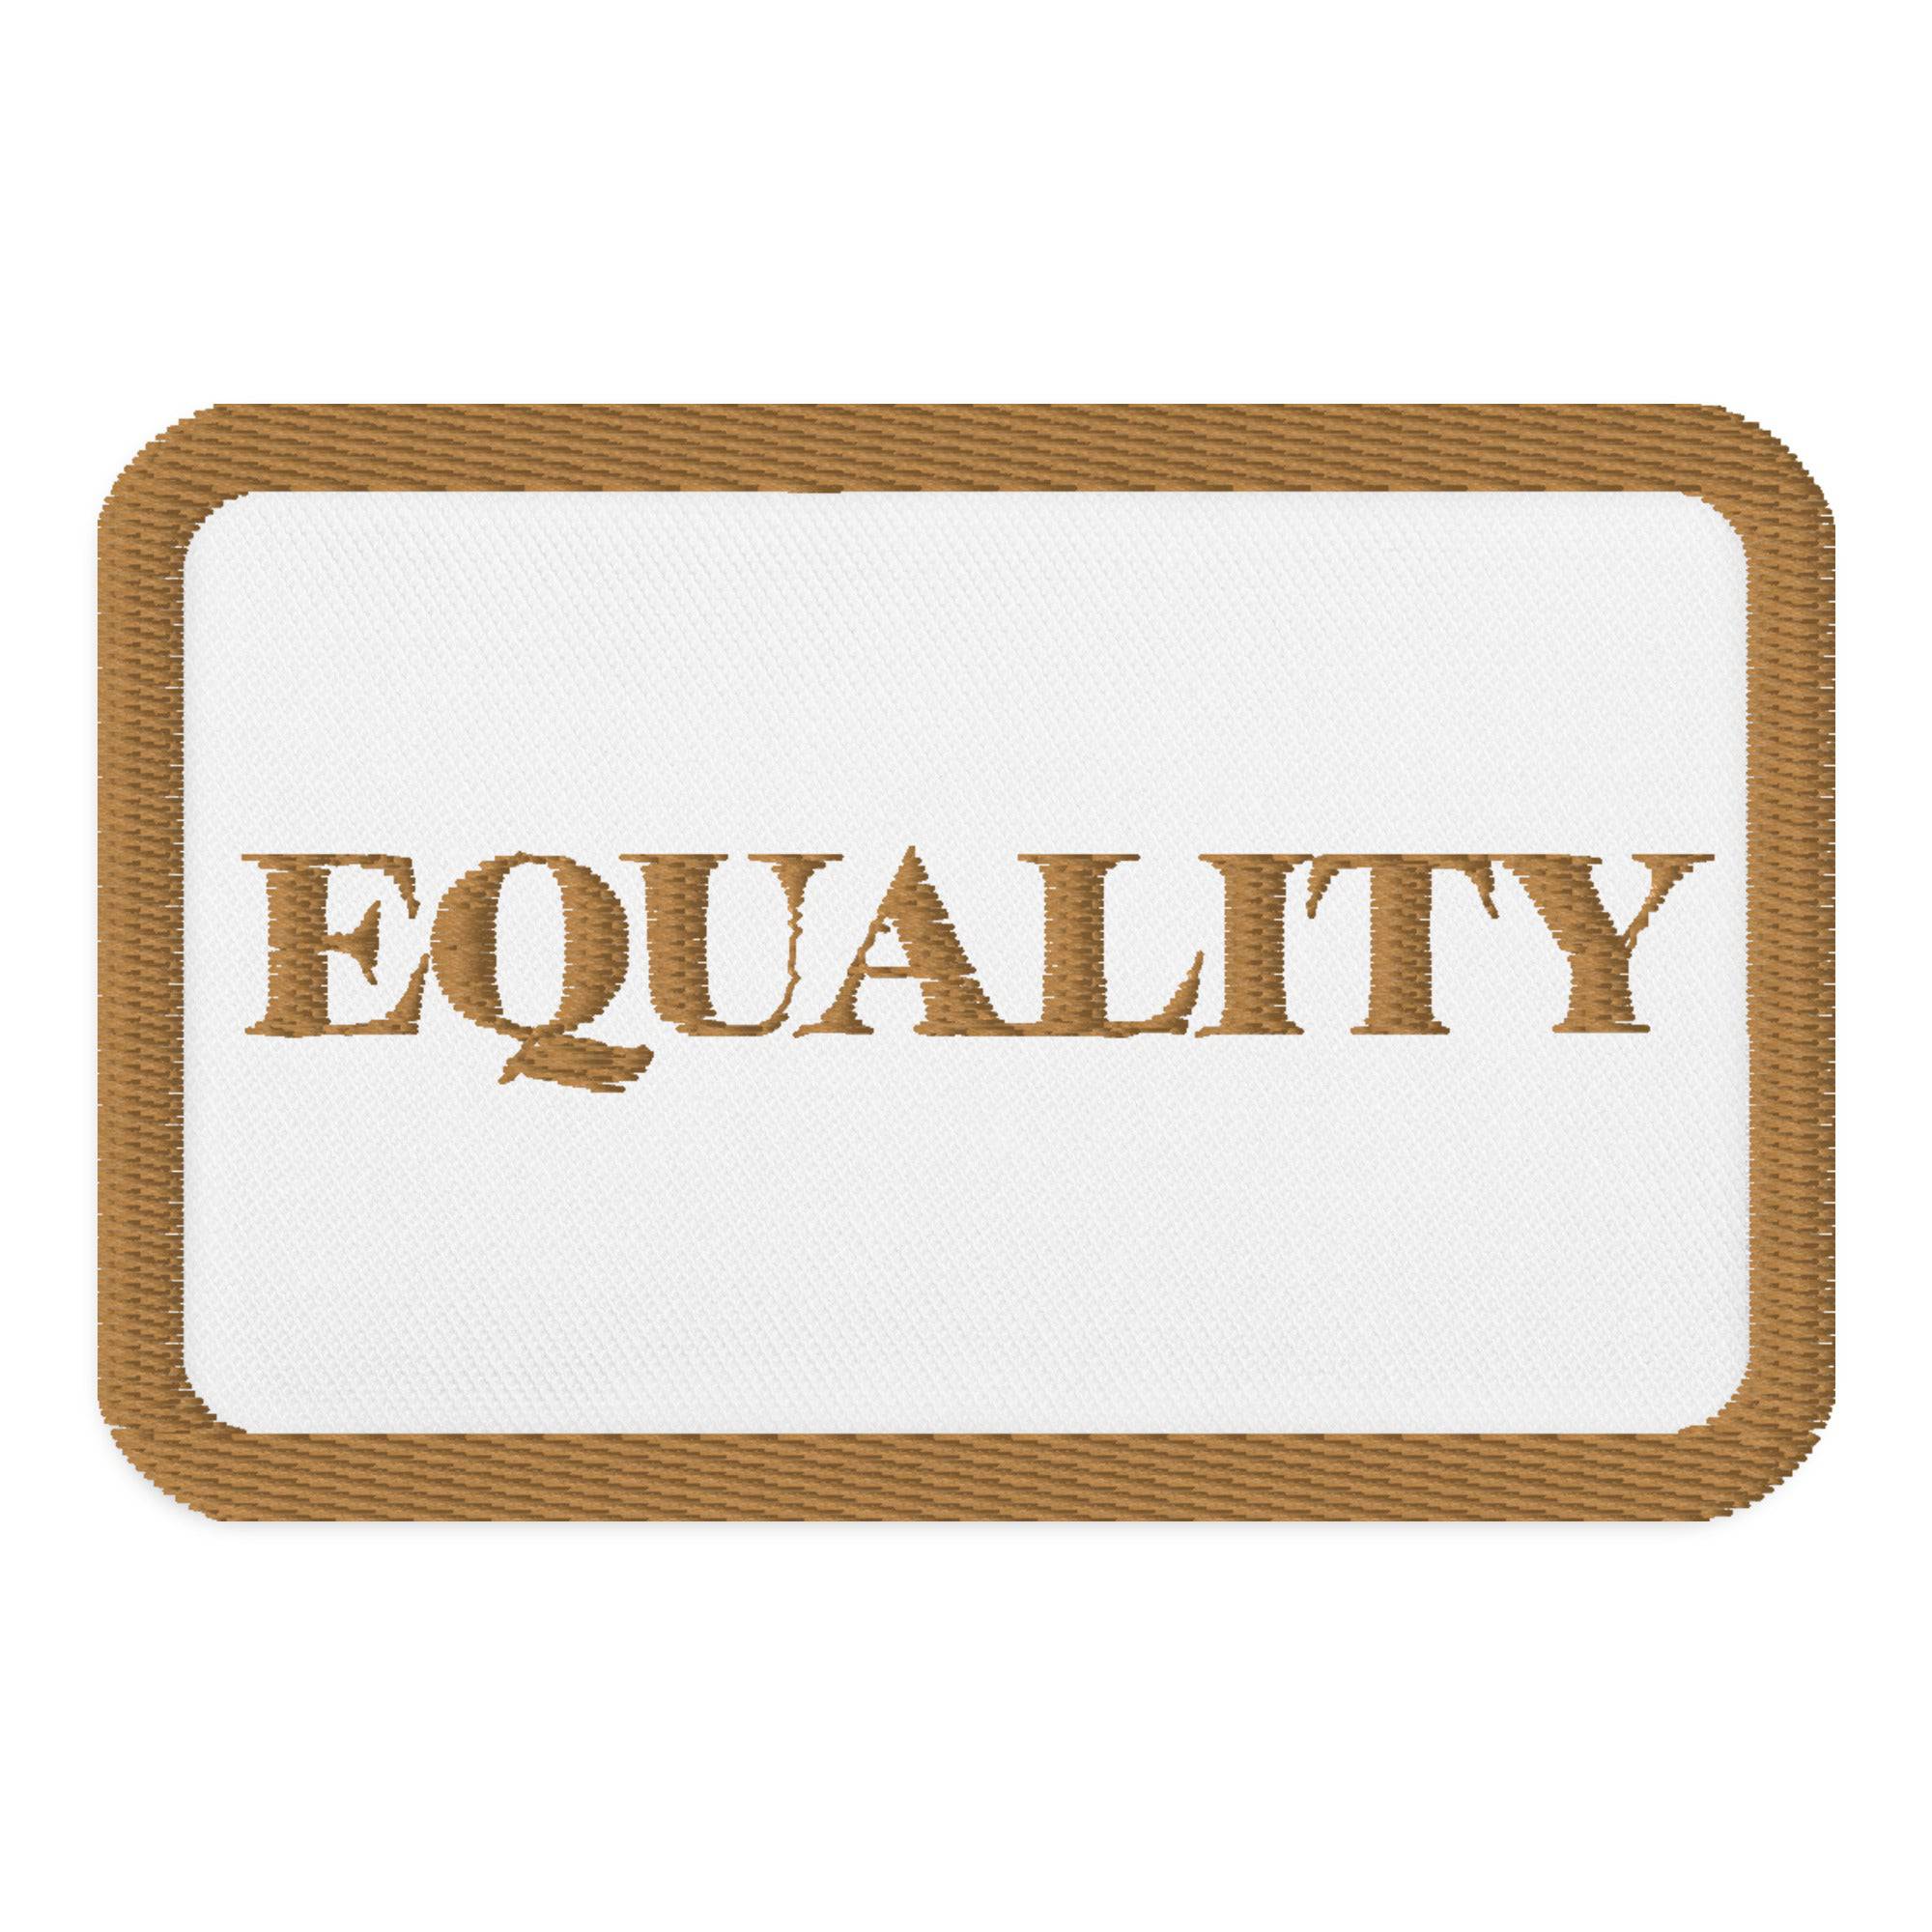 Equality Patch Embroidered patches